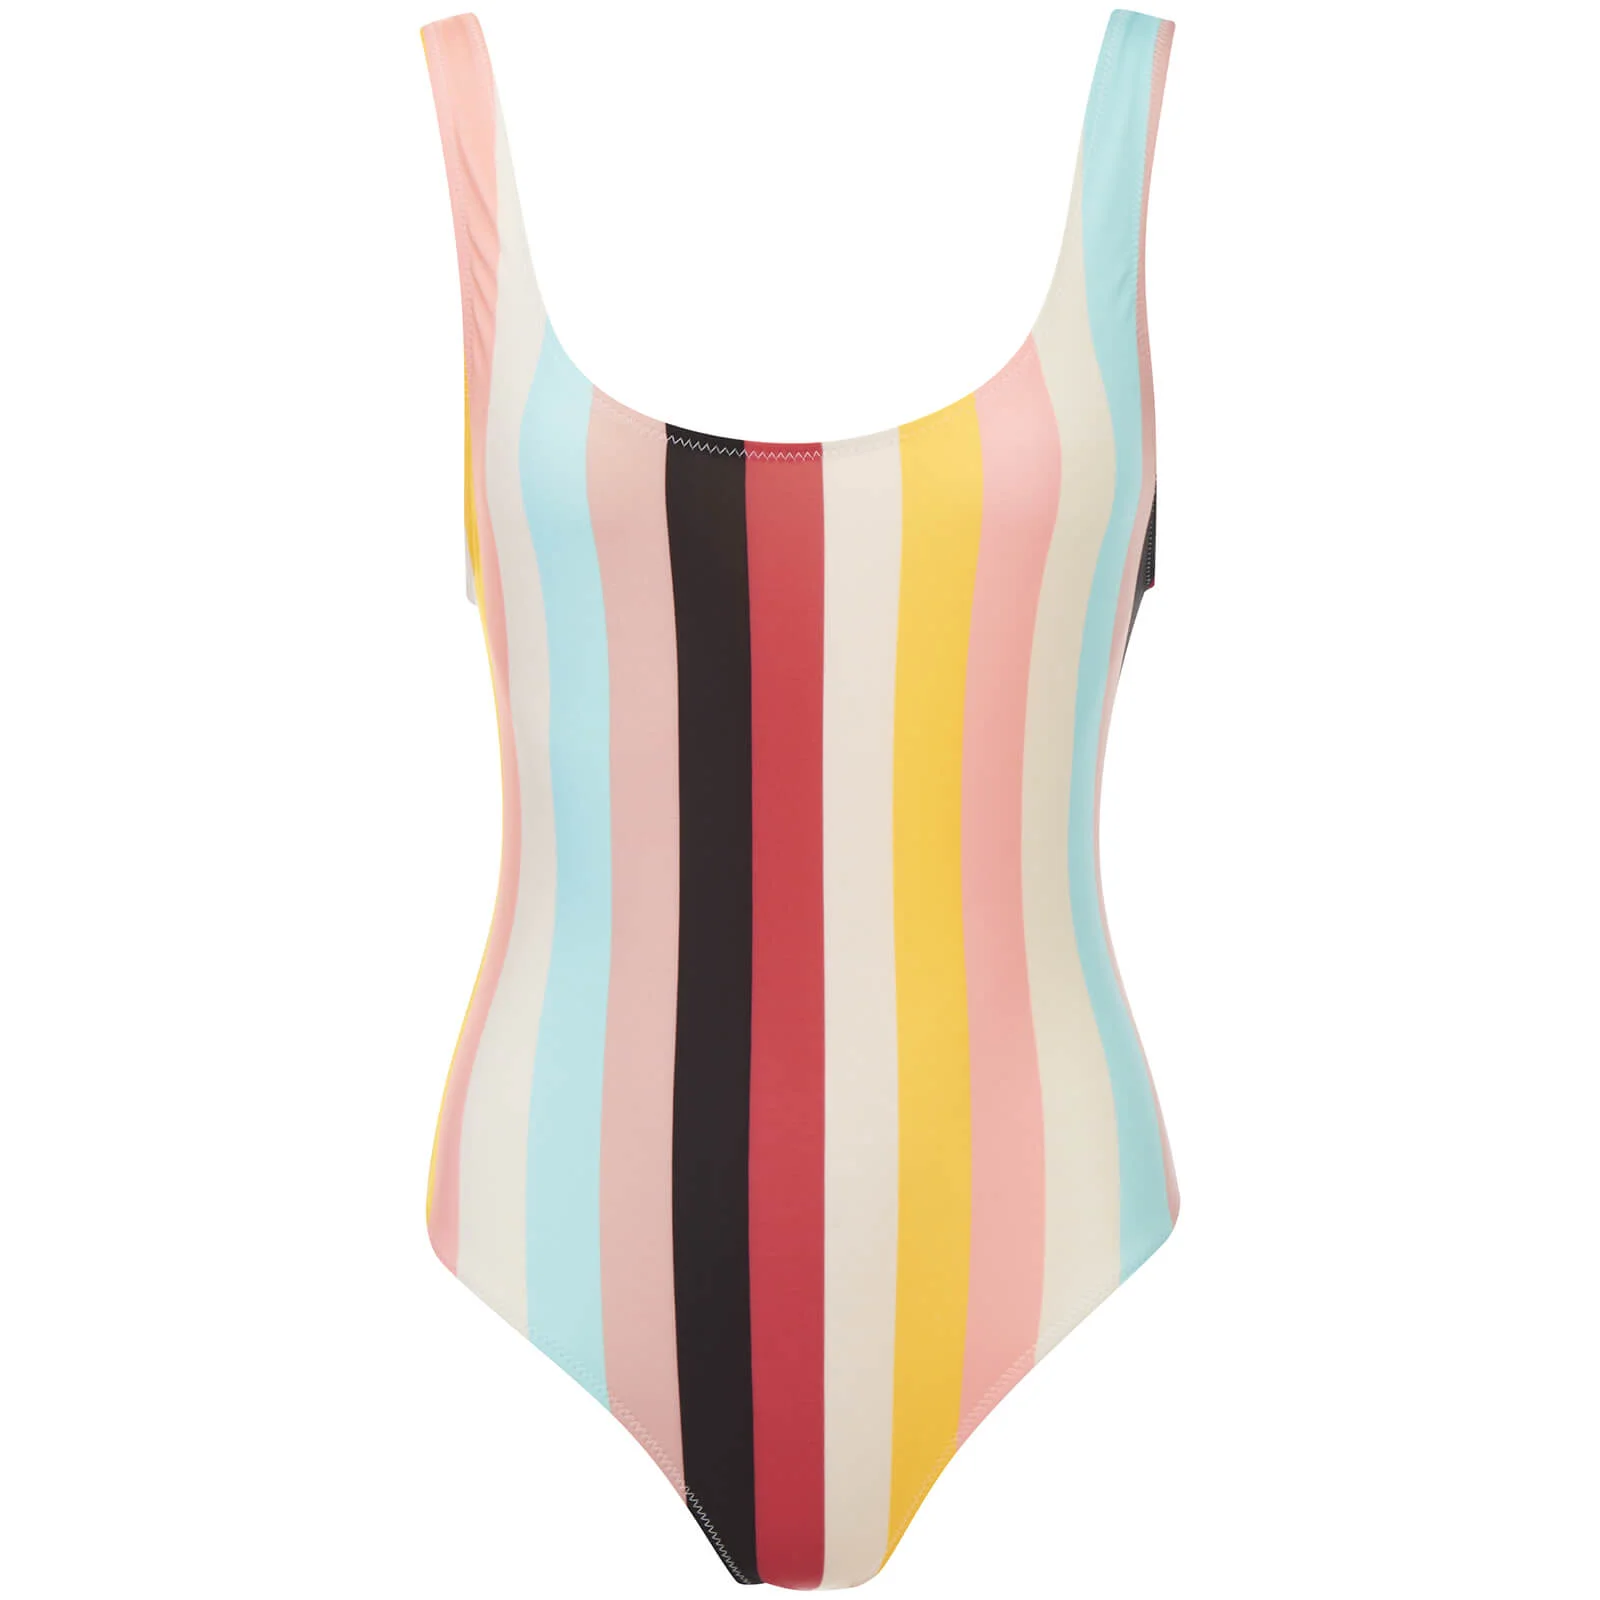 Solid & Striped Women's The Anne-Marie Spring Swimsuit - Multi/Stripe Image 1